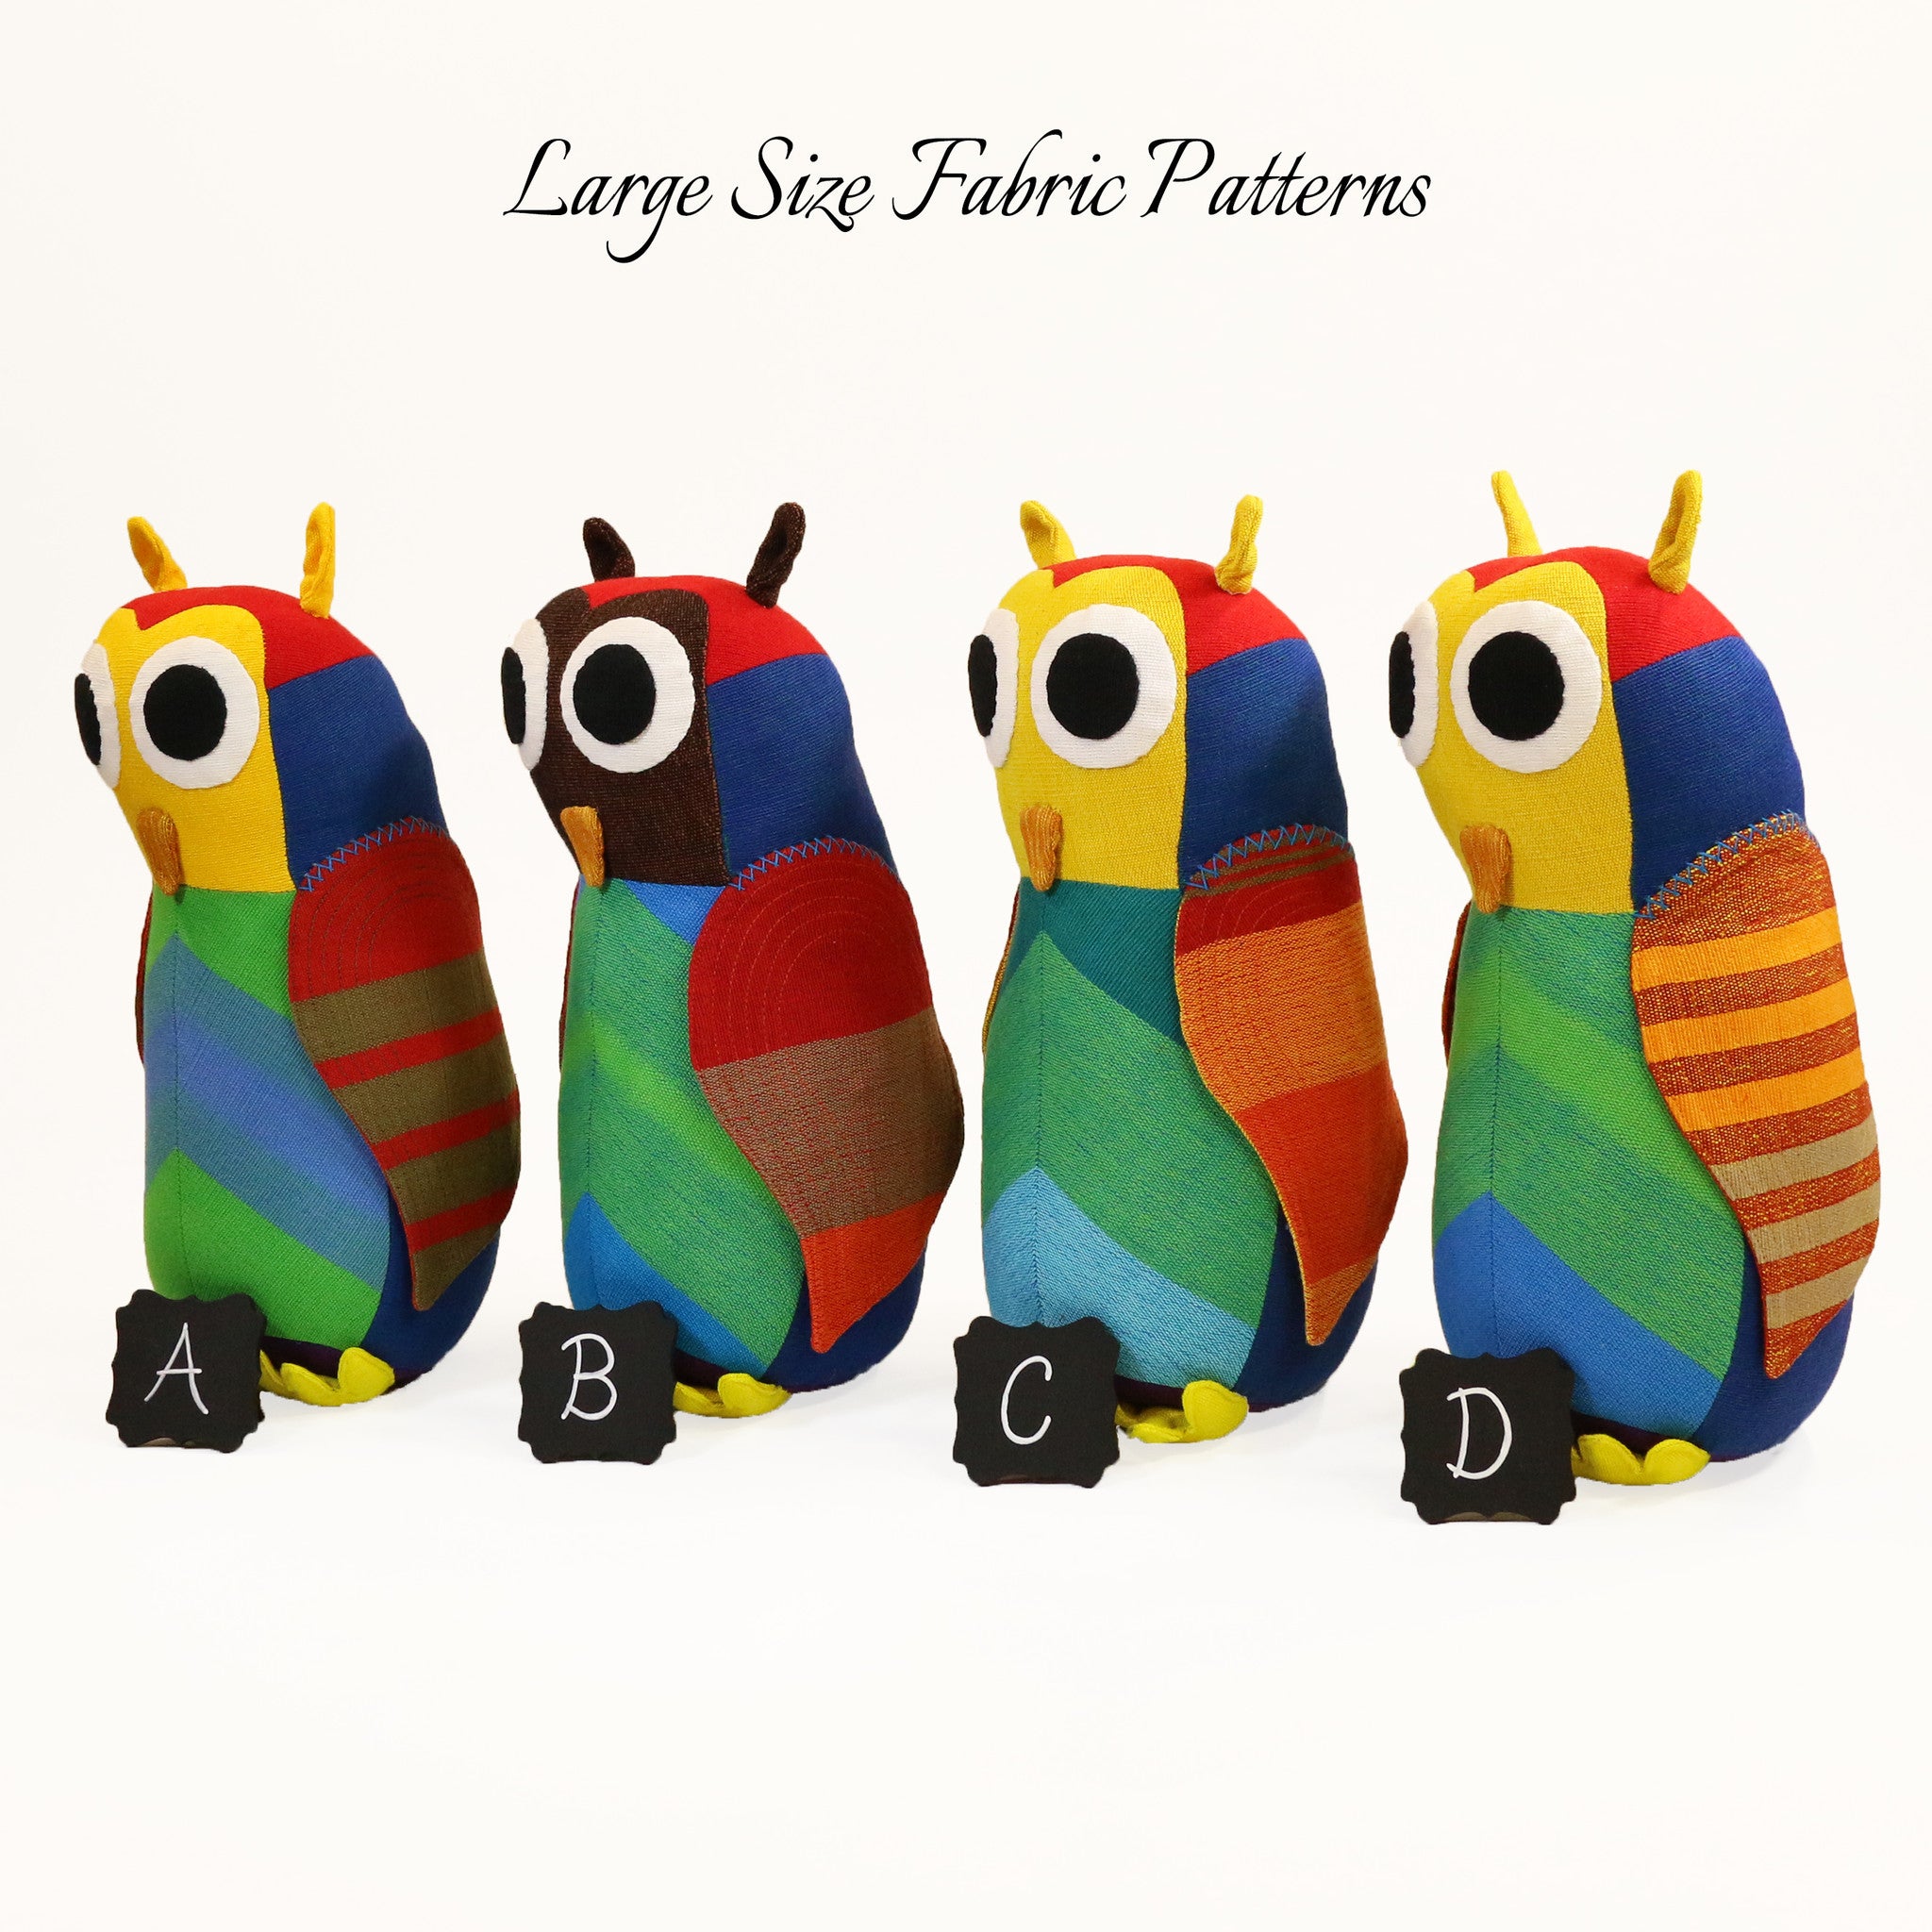 Harvey, the Owl – large size fabric patterns shown